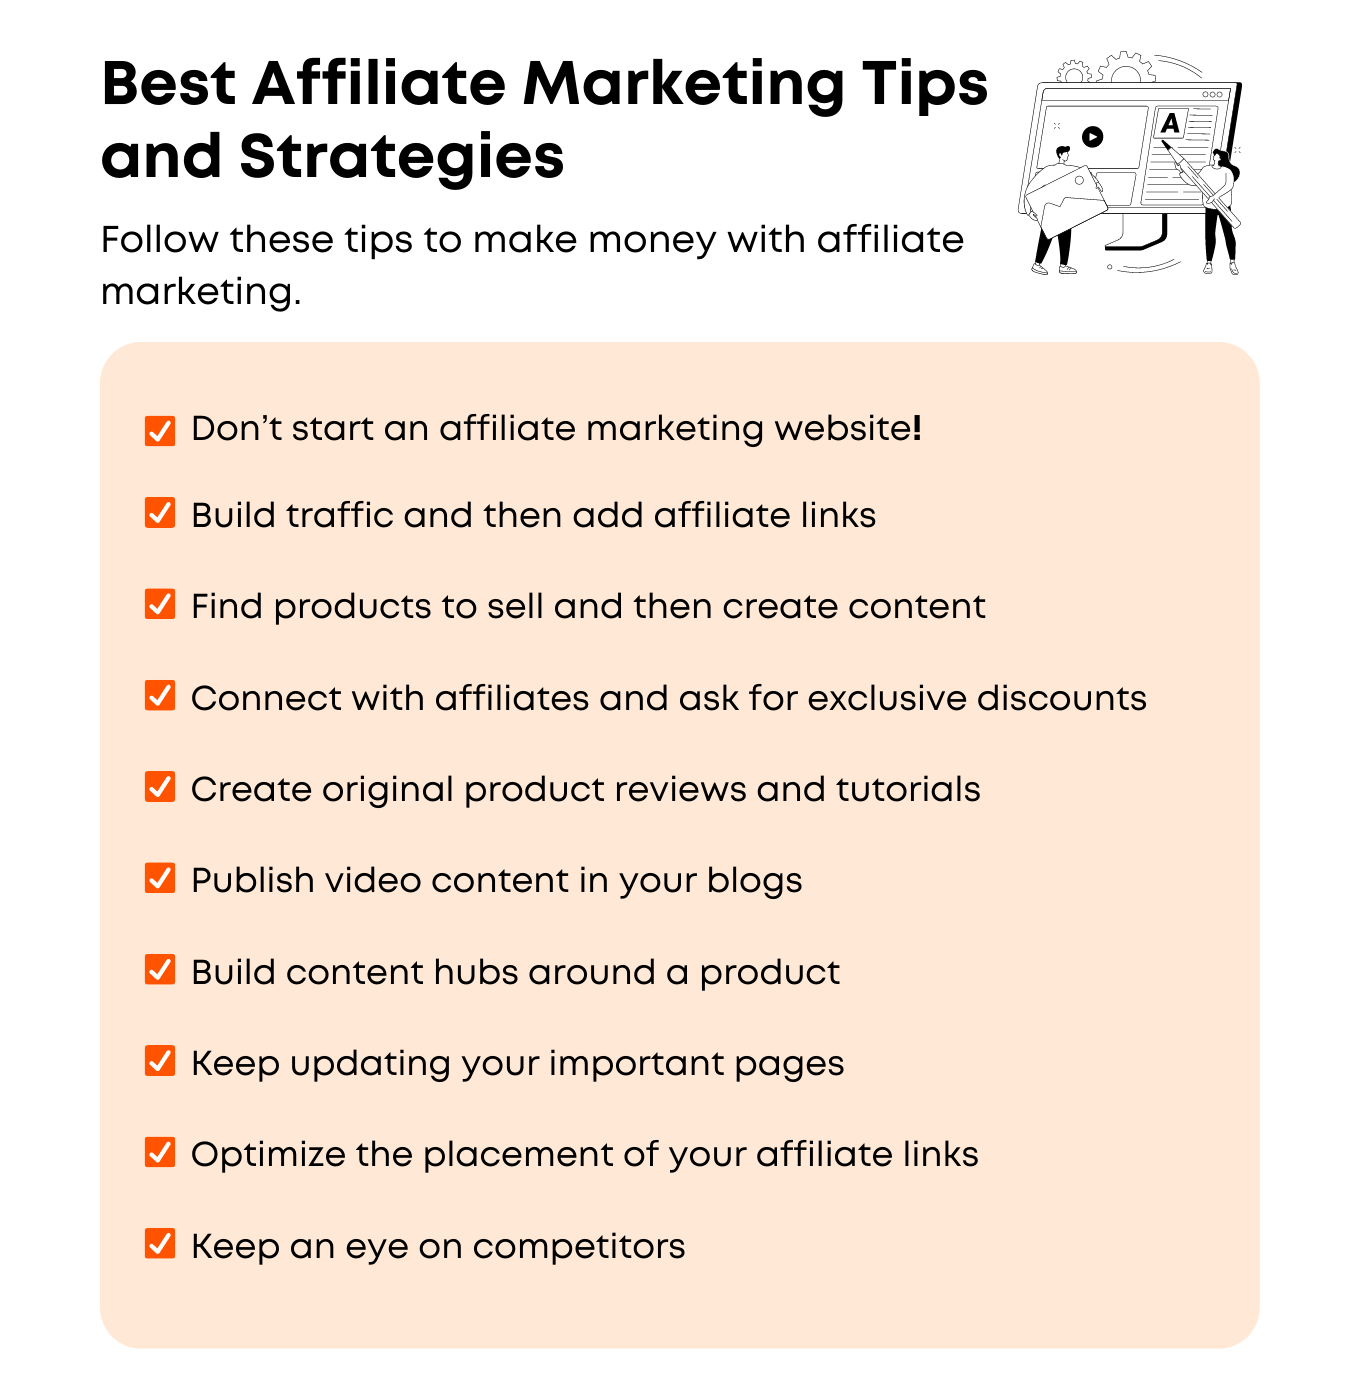 Strategies to Optimize Your Affiliate Marketing Campaigns